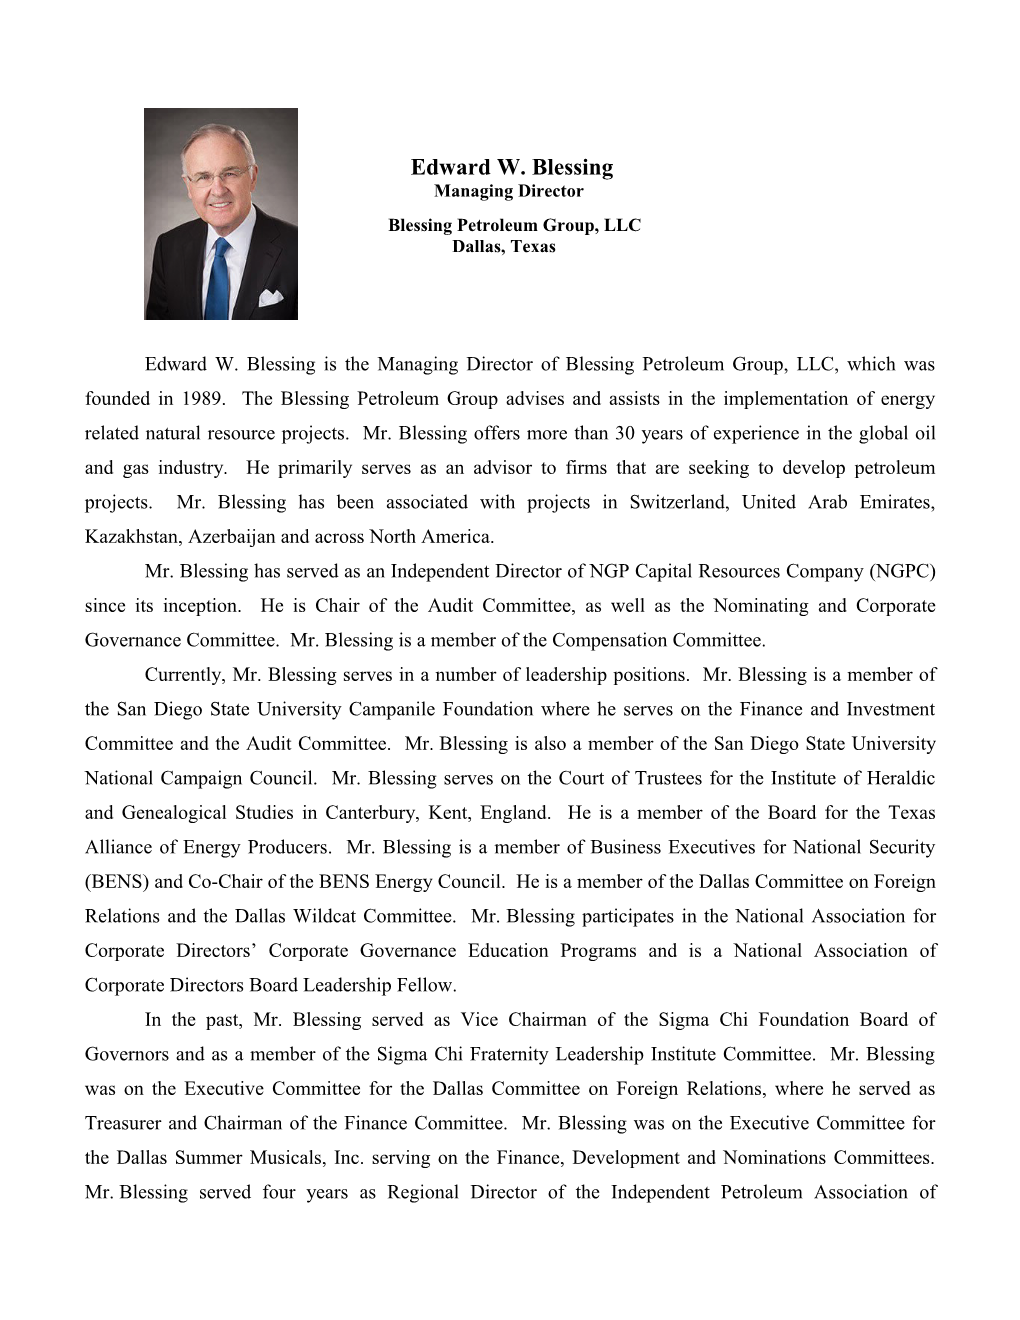 Edward W. Blessing Is the Managing Director of Blessing Petroleum Group, LLC, Which Was